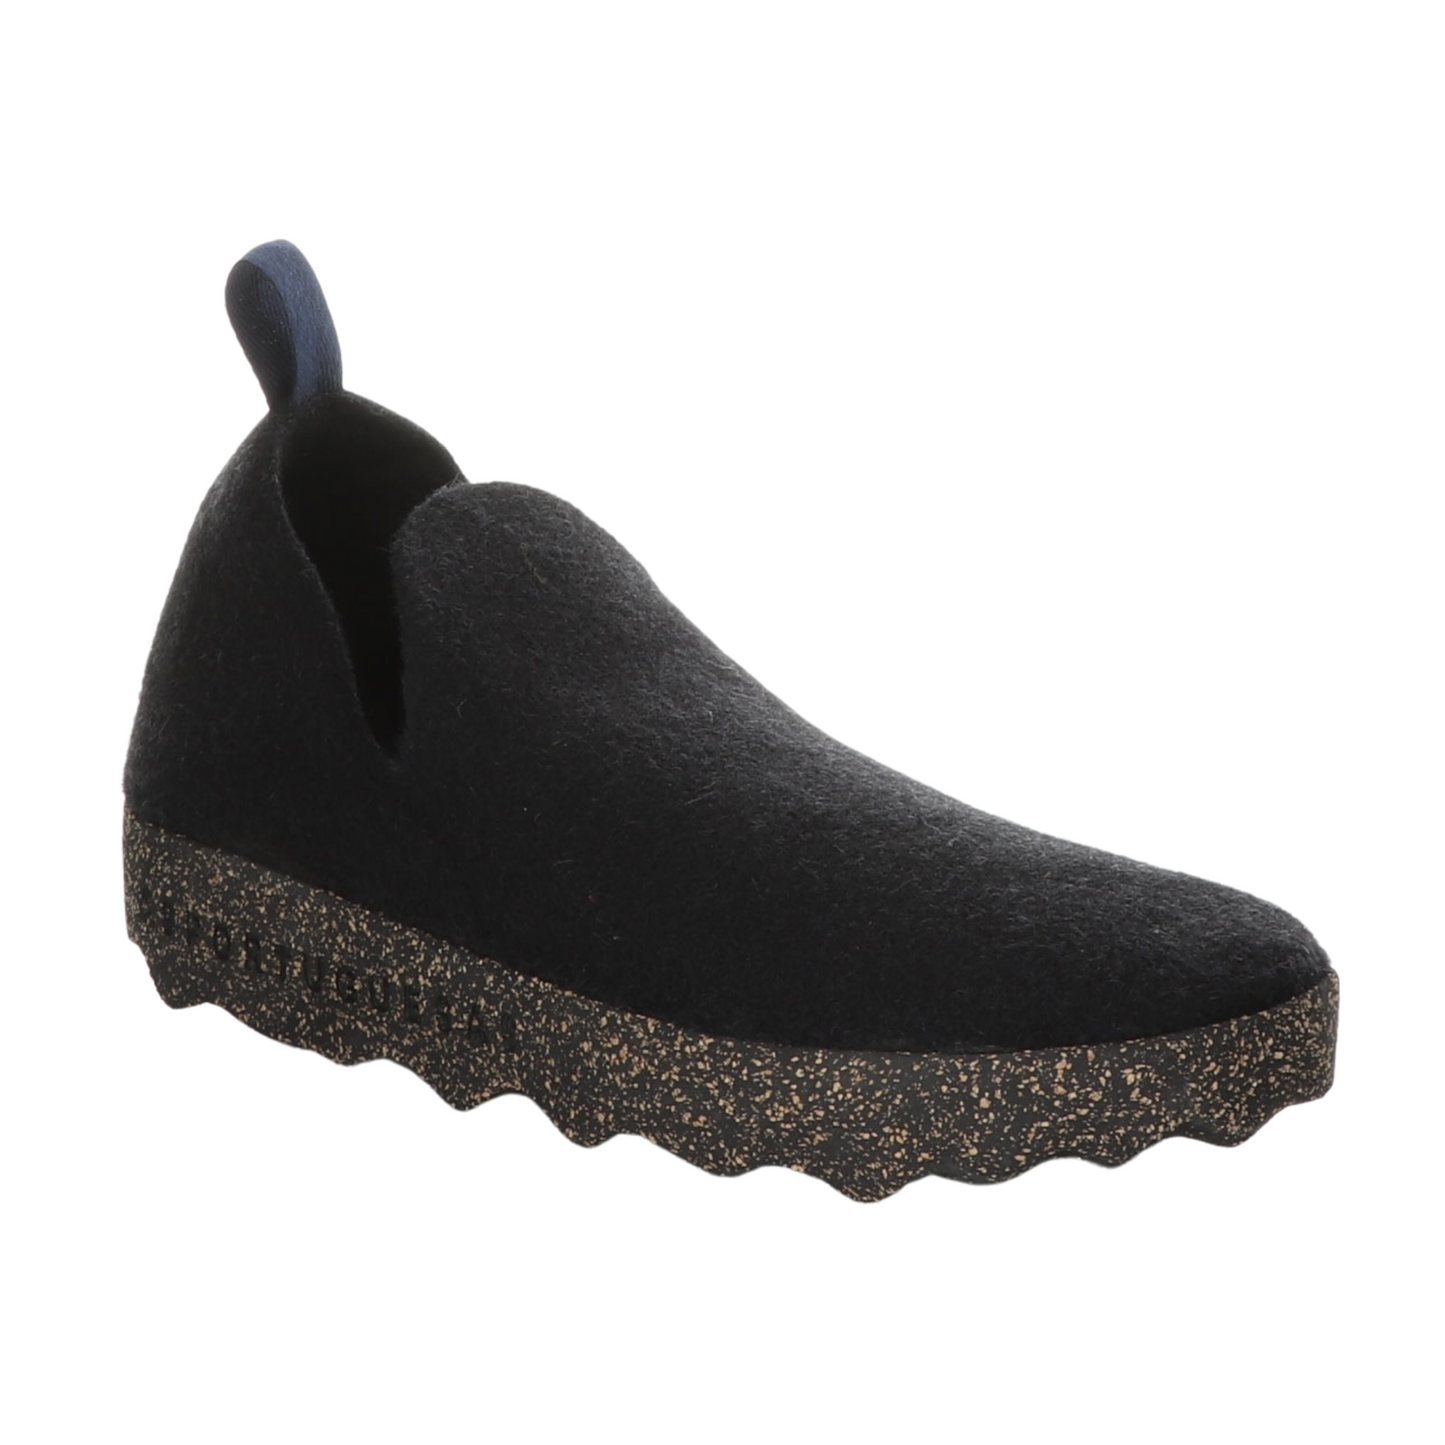  A black wool sneaker with oblong cutouts, navy heel tab, and black speckled cork soul is pictured from a slight angle.